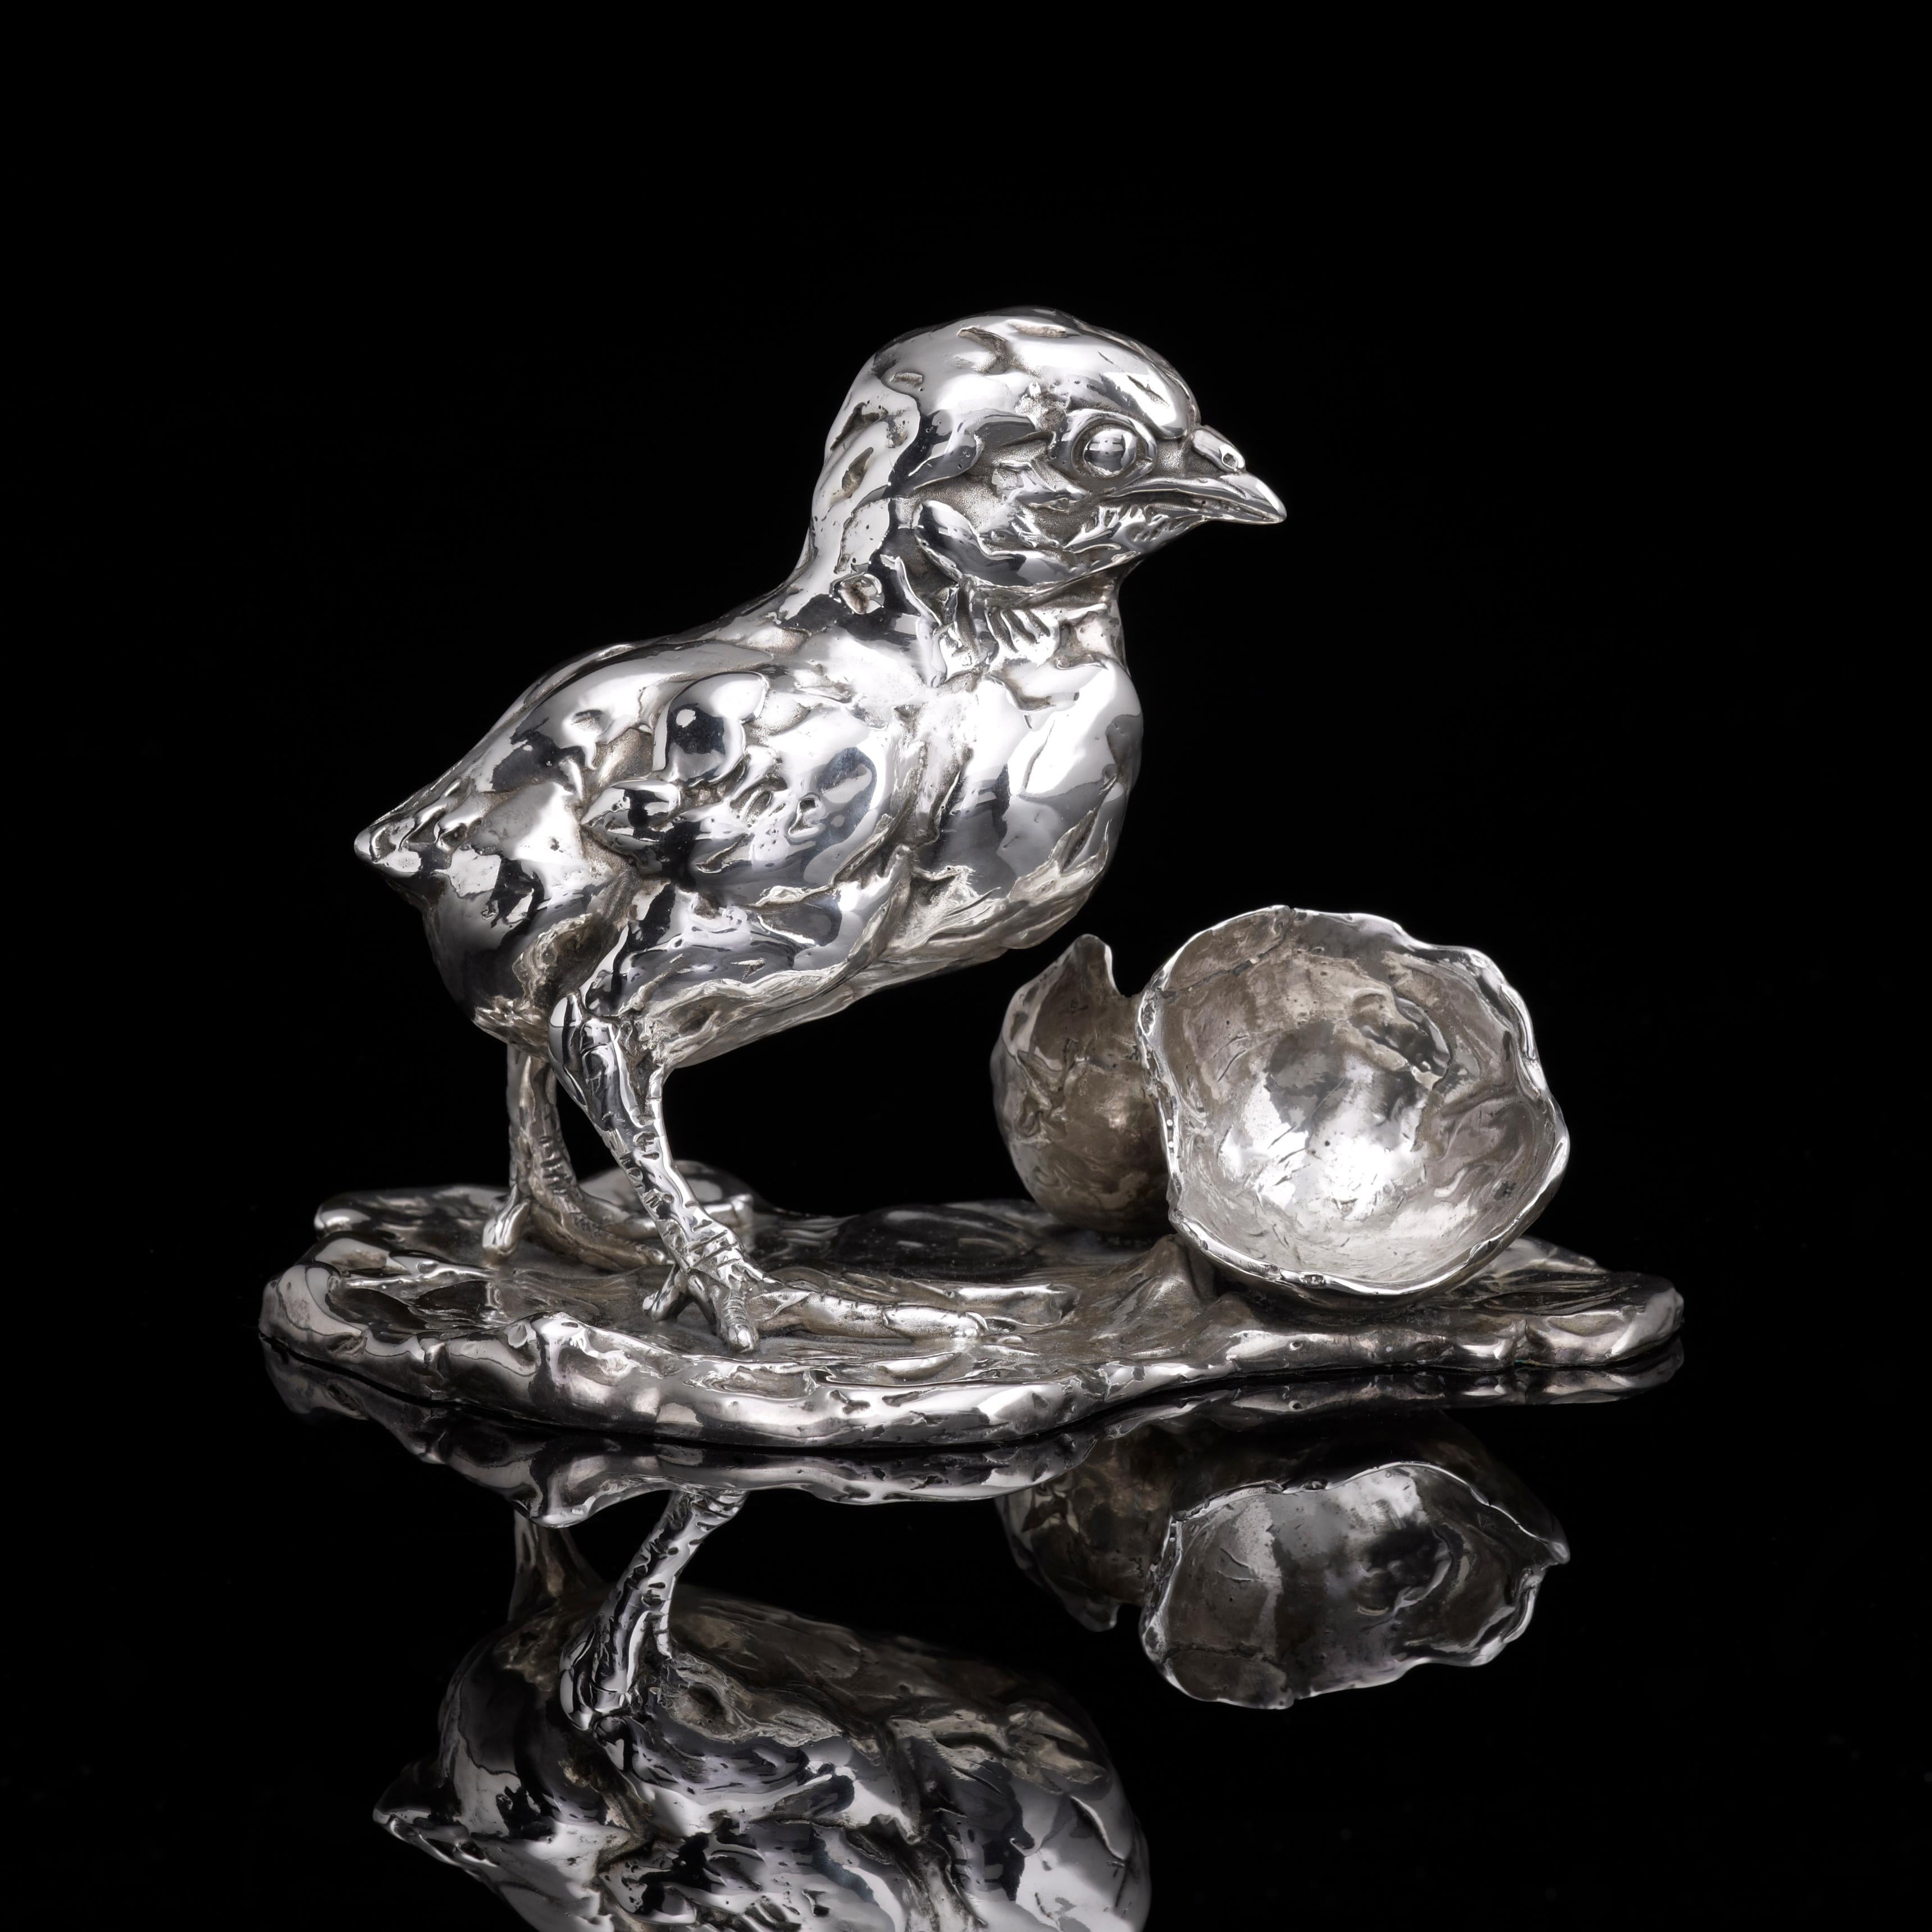  Lucy Kinsella 'Chicken & Egg' Sterling Silver Sculpture 5